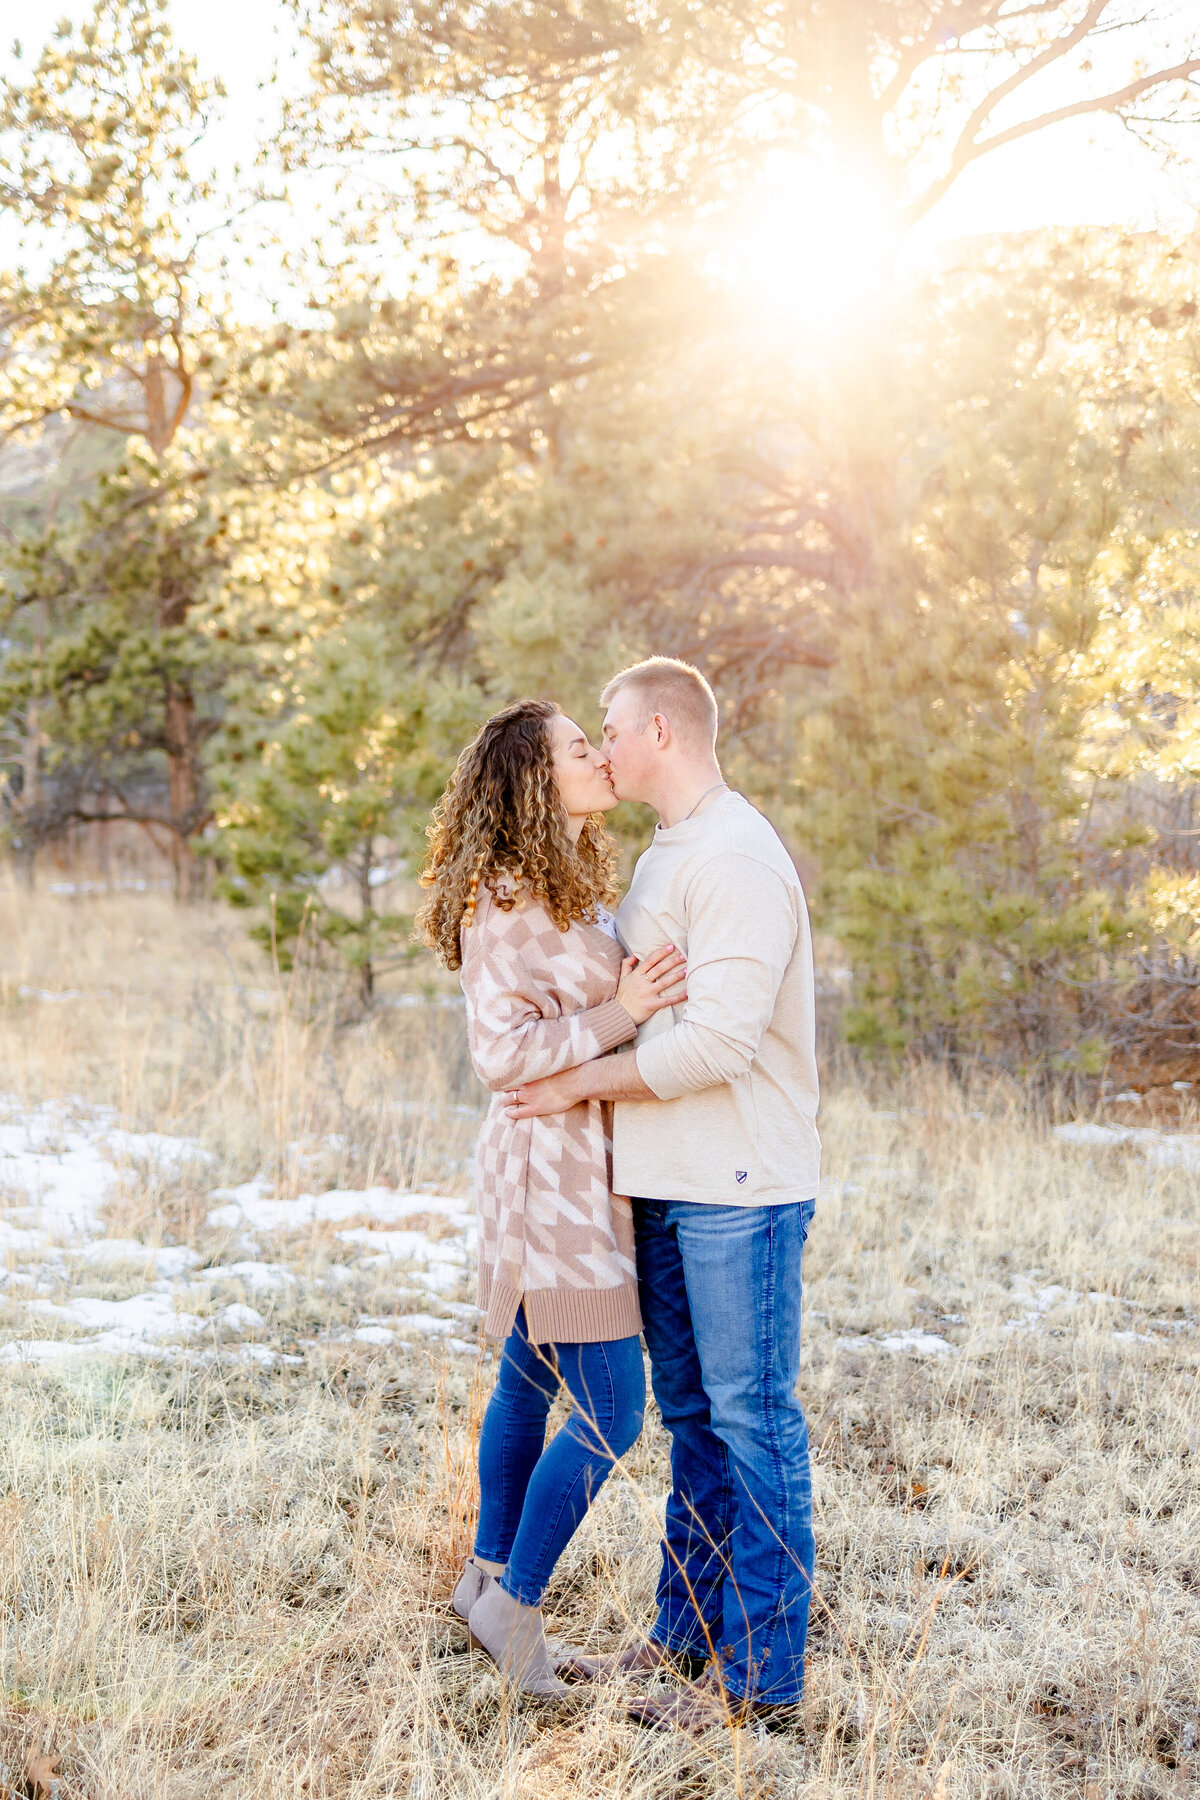 Colorado Springs Family Photographer _ Couple kissing  in field with trees and a sun flare